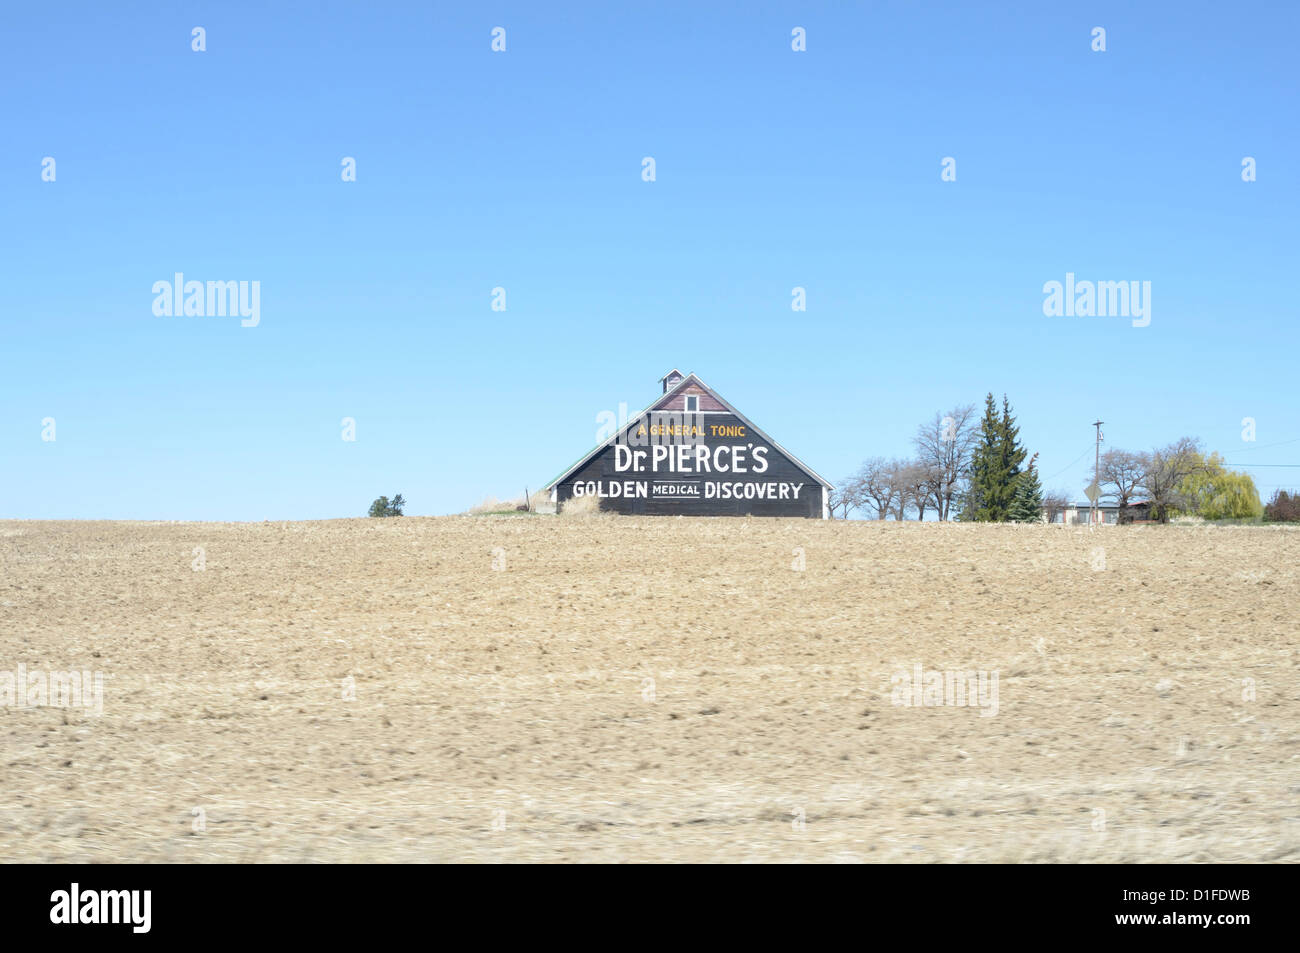 Old advertising on barn with tilled field in foreground, Waterville, Washington State, United States of America, North America Stock Photo